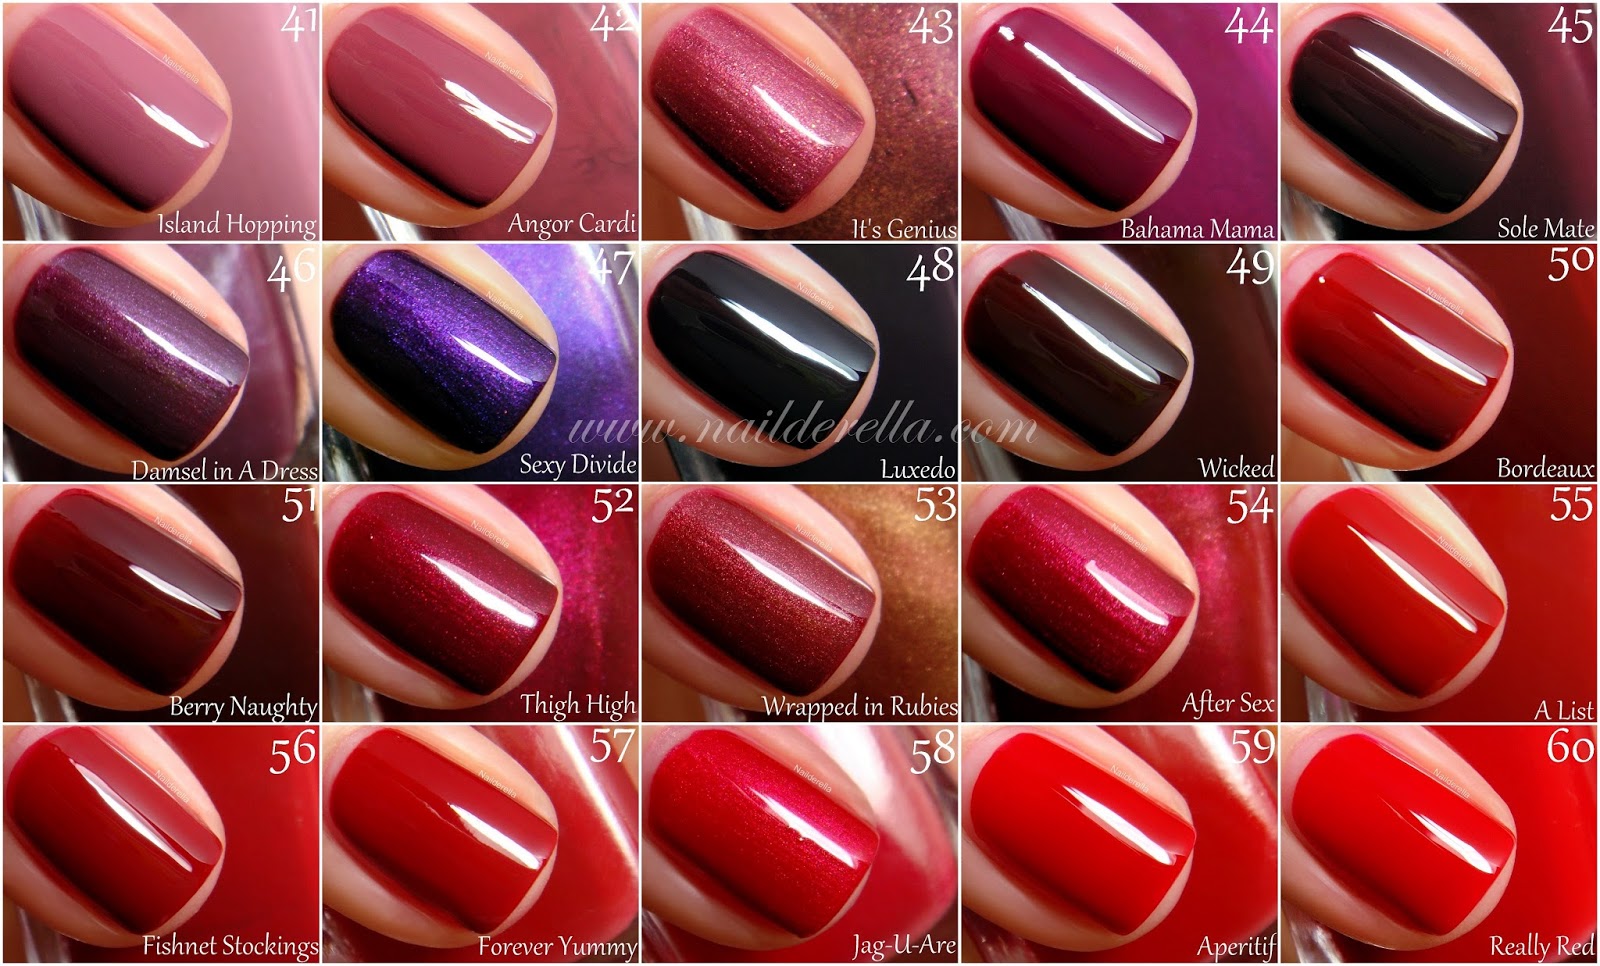 2. Essie Nail Polish in "Berry Naughty" - wide 5